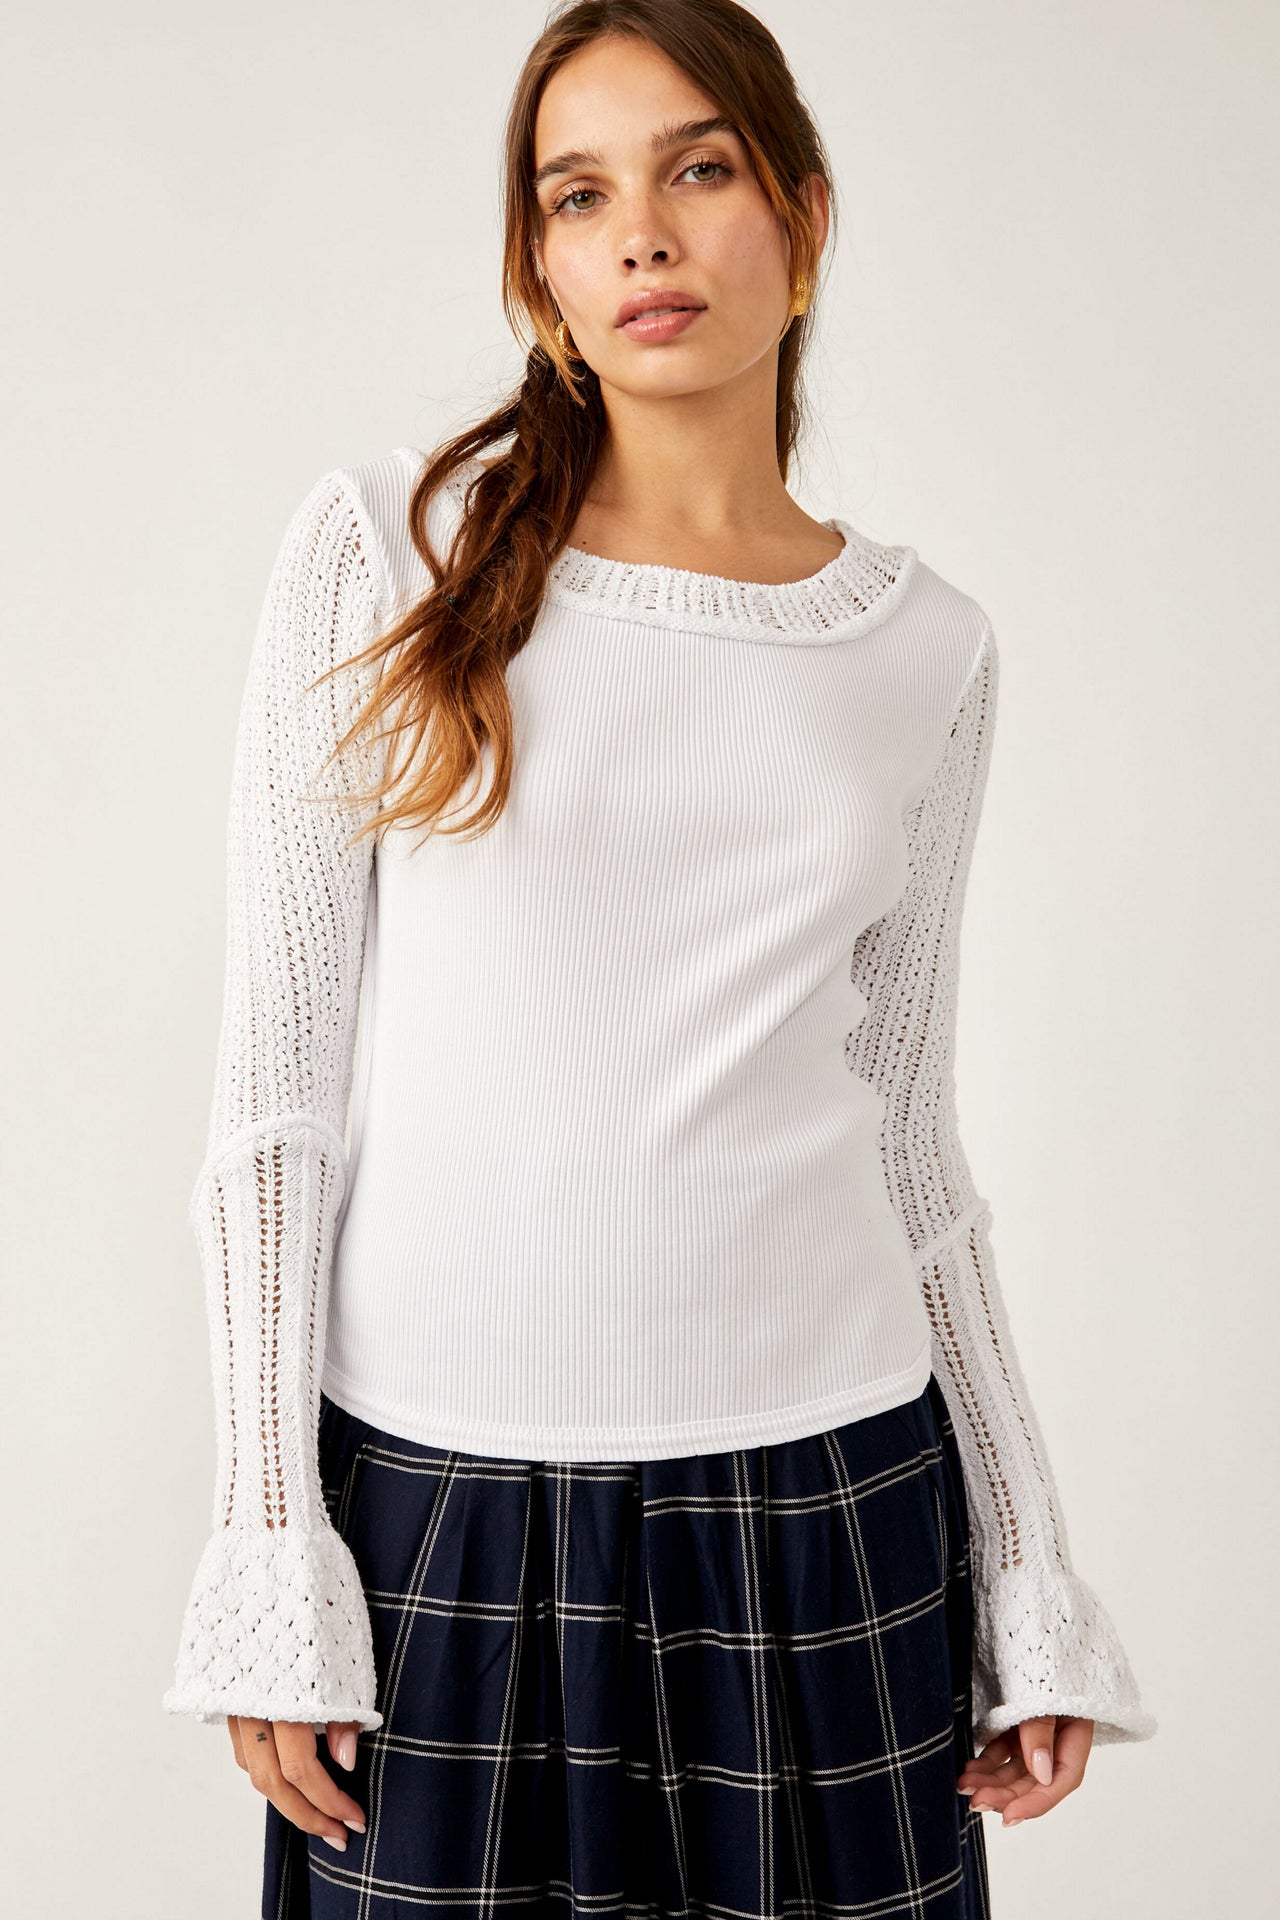 Cuffing Season Long Sleeve Top Ivory, Long Blouse by Free People | LIT Boutique